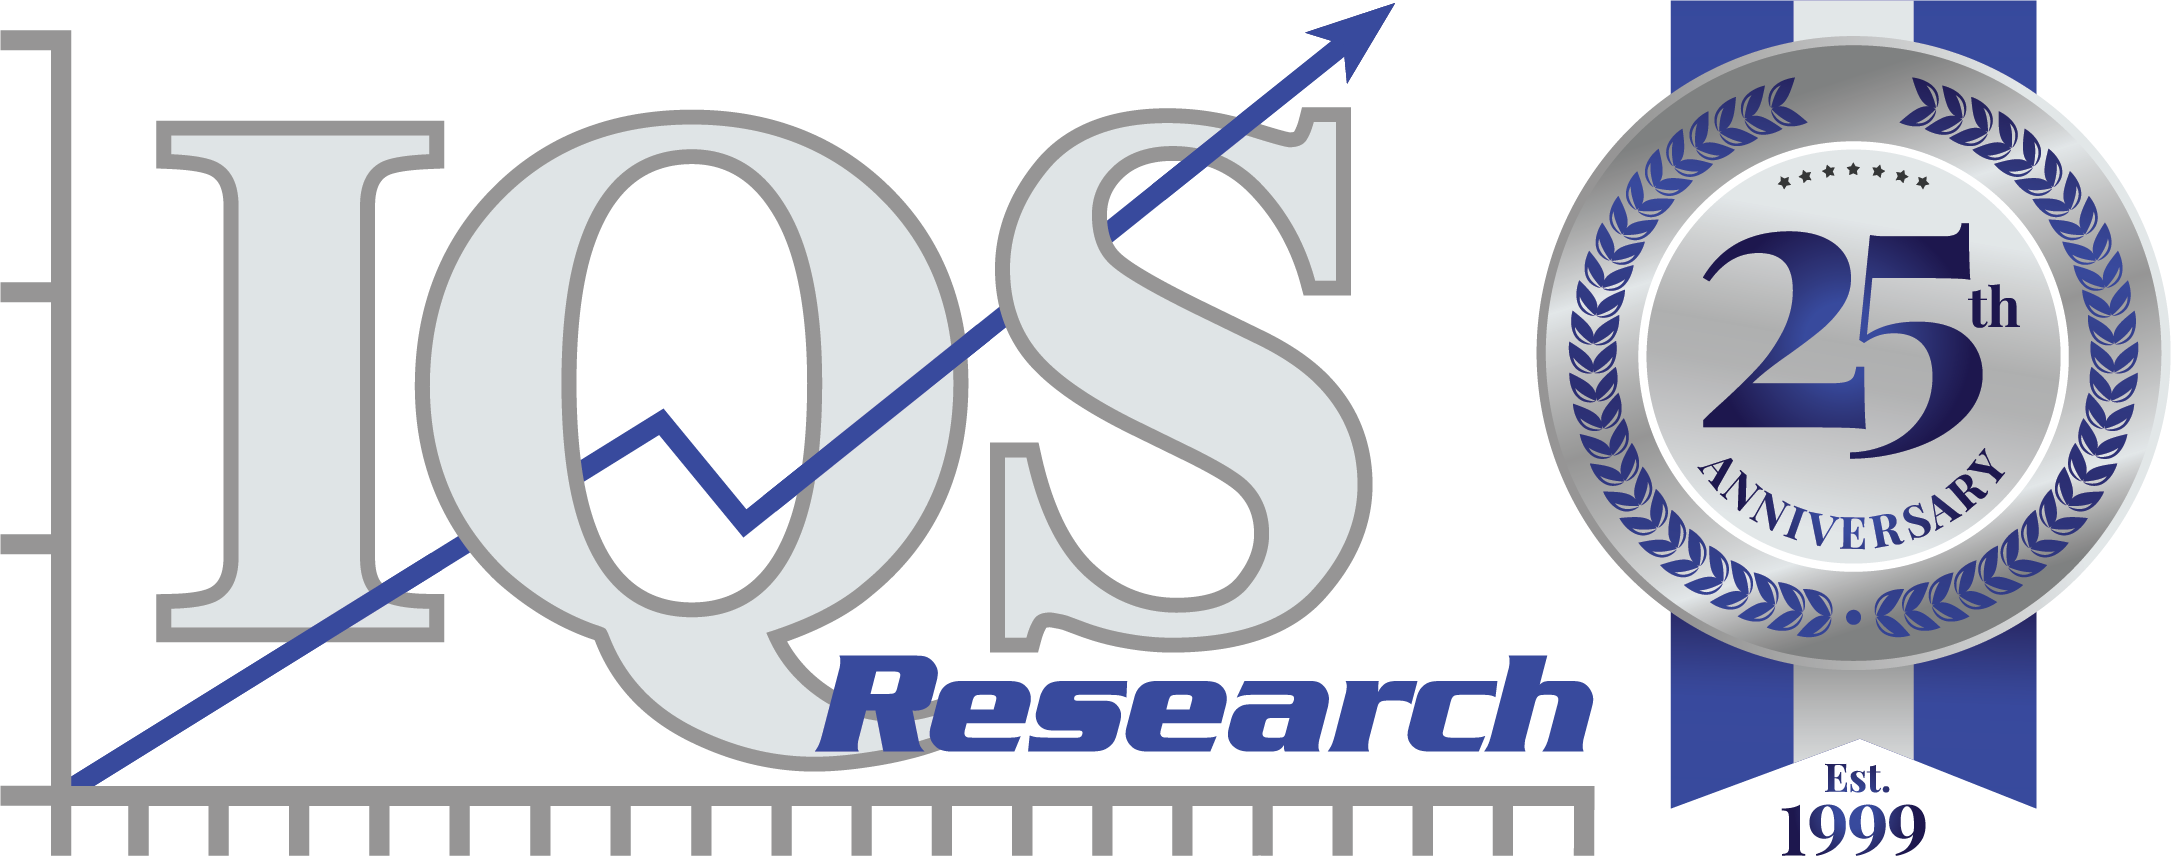 IQS Research